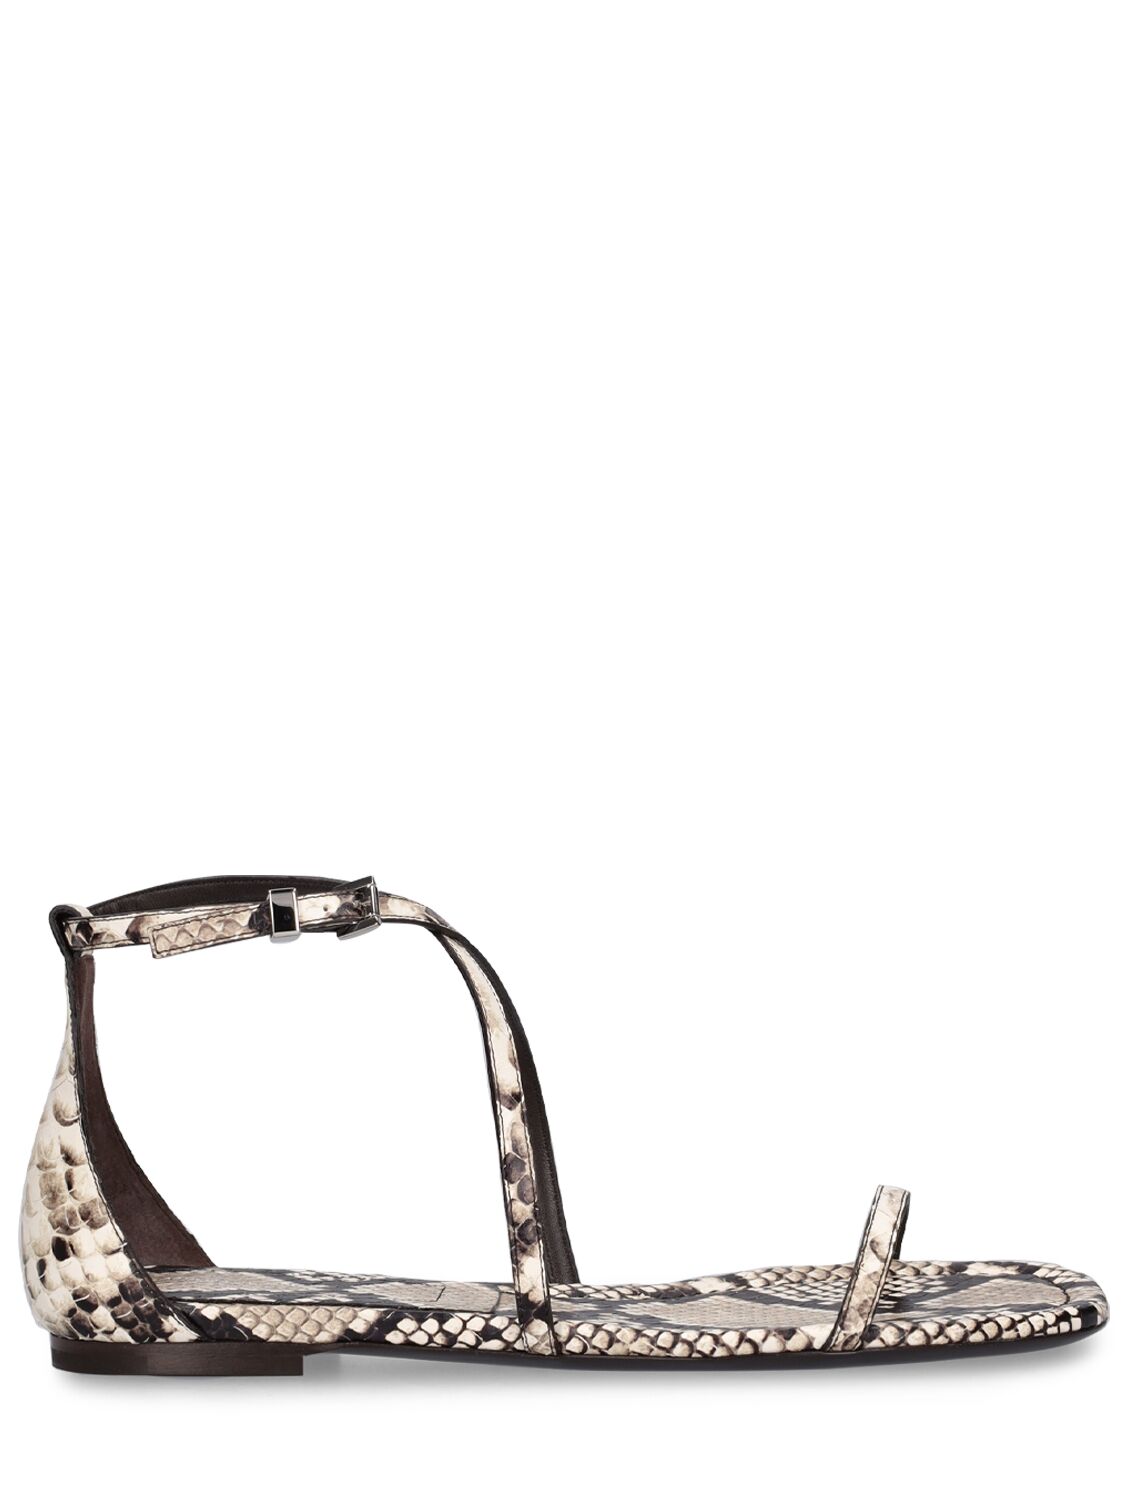 5mm Polly Runway Python Print Sandals – WOMEN > SHOES > SANDALS